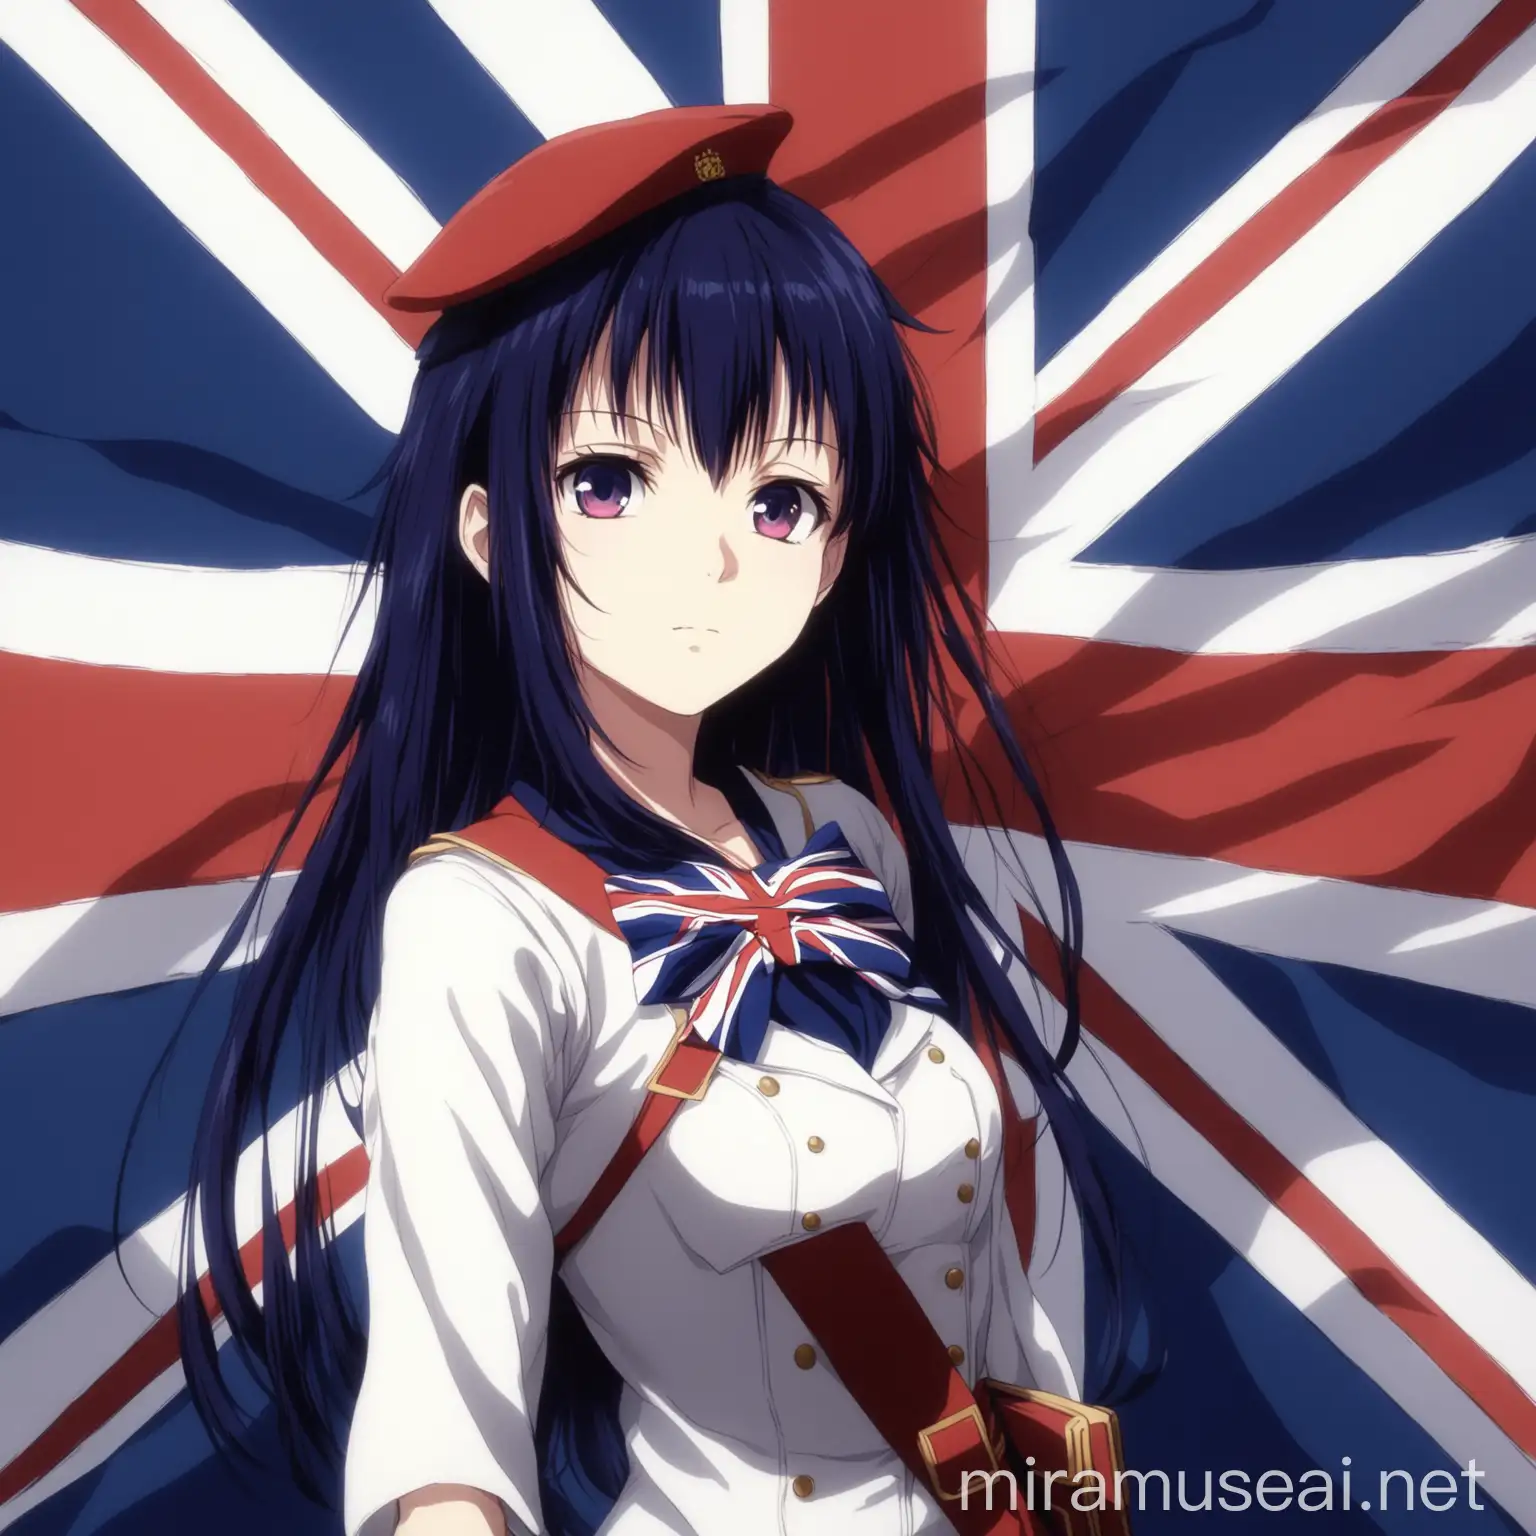 Anime Girl with British Flag Cute Cartoon Character Posing with UK Symbol